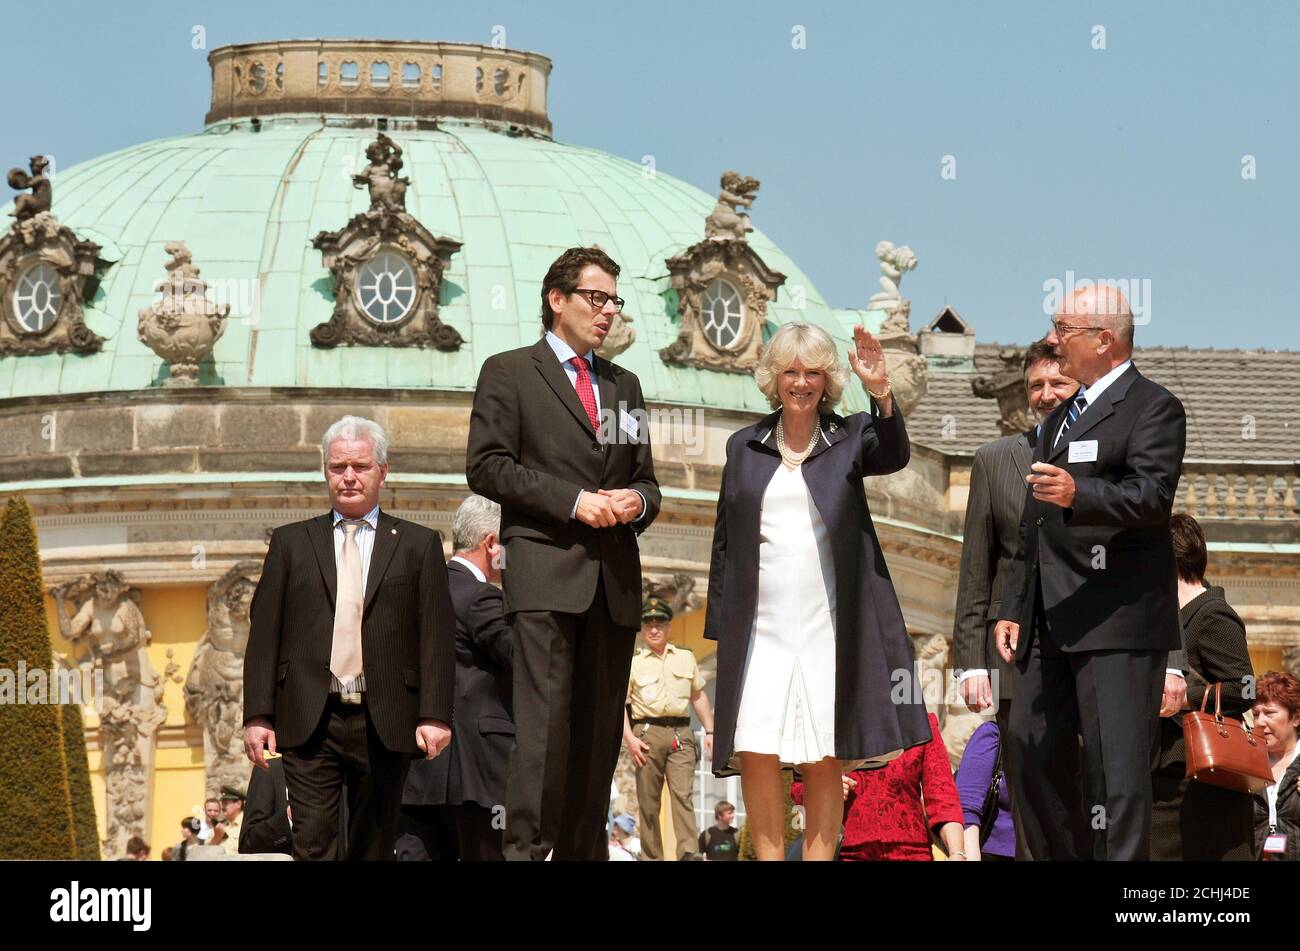 The Duchess of Cornwall waves to well-wishers during her tour of the Sans Souci Palace in Potsdam outside Berlin. Stock Photo